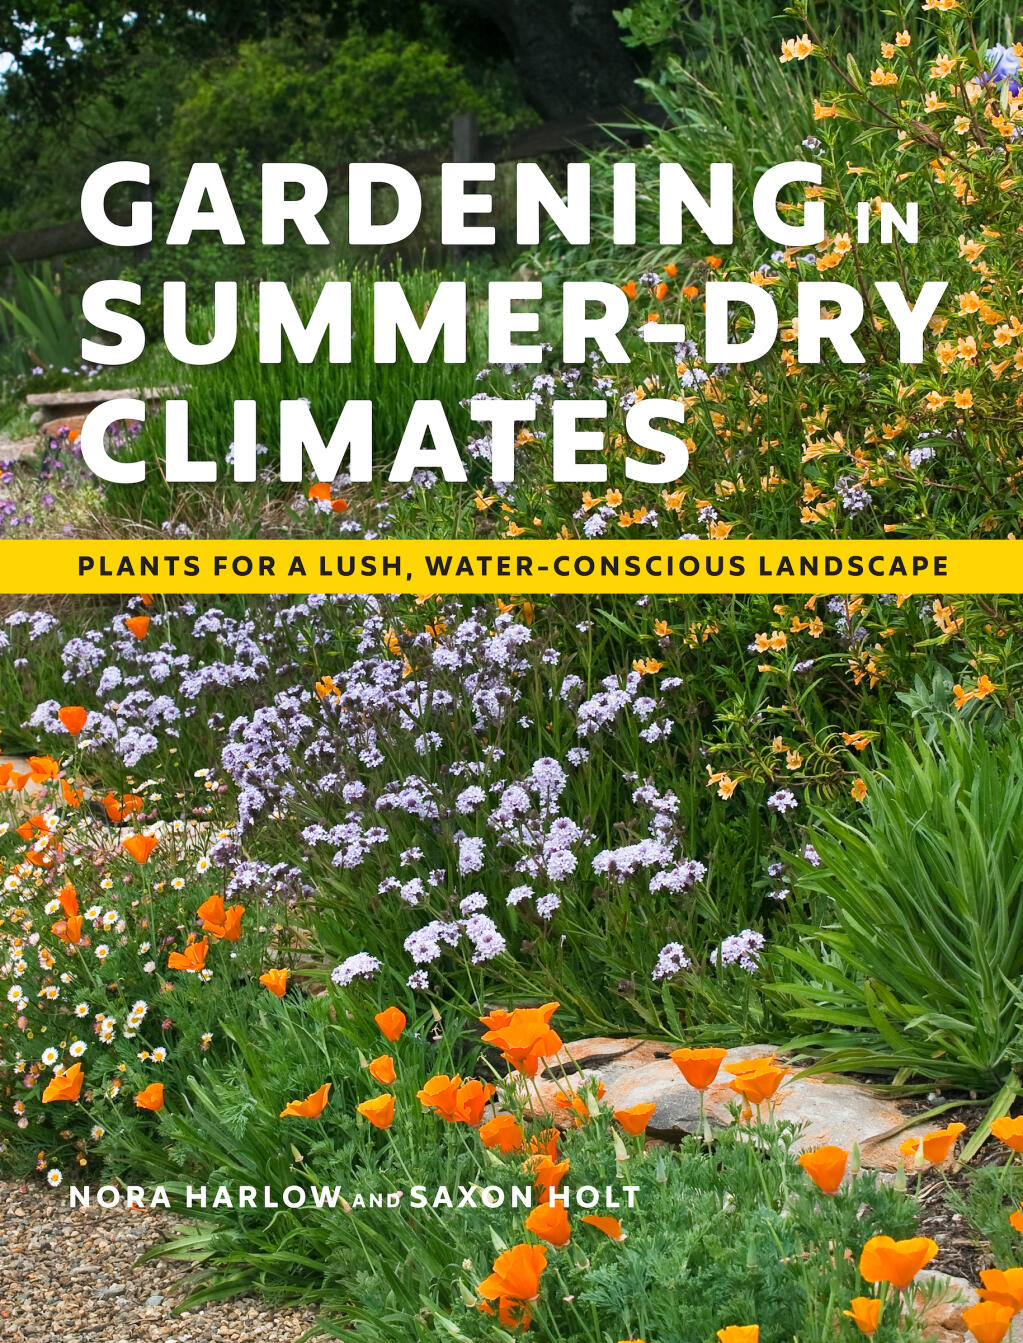 Gardening in Summer-Dry Climates -- by Nora Harlow and Saxon Holt; Timber Press book cover